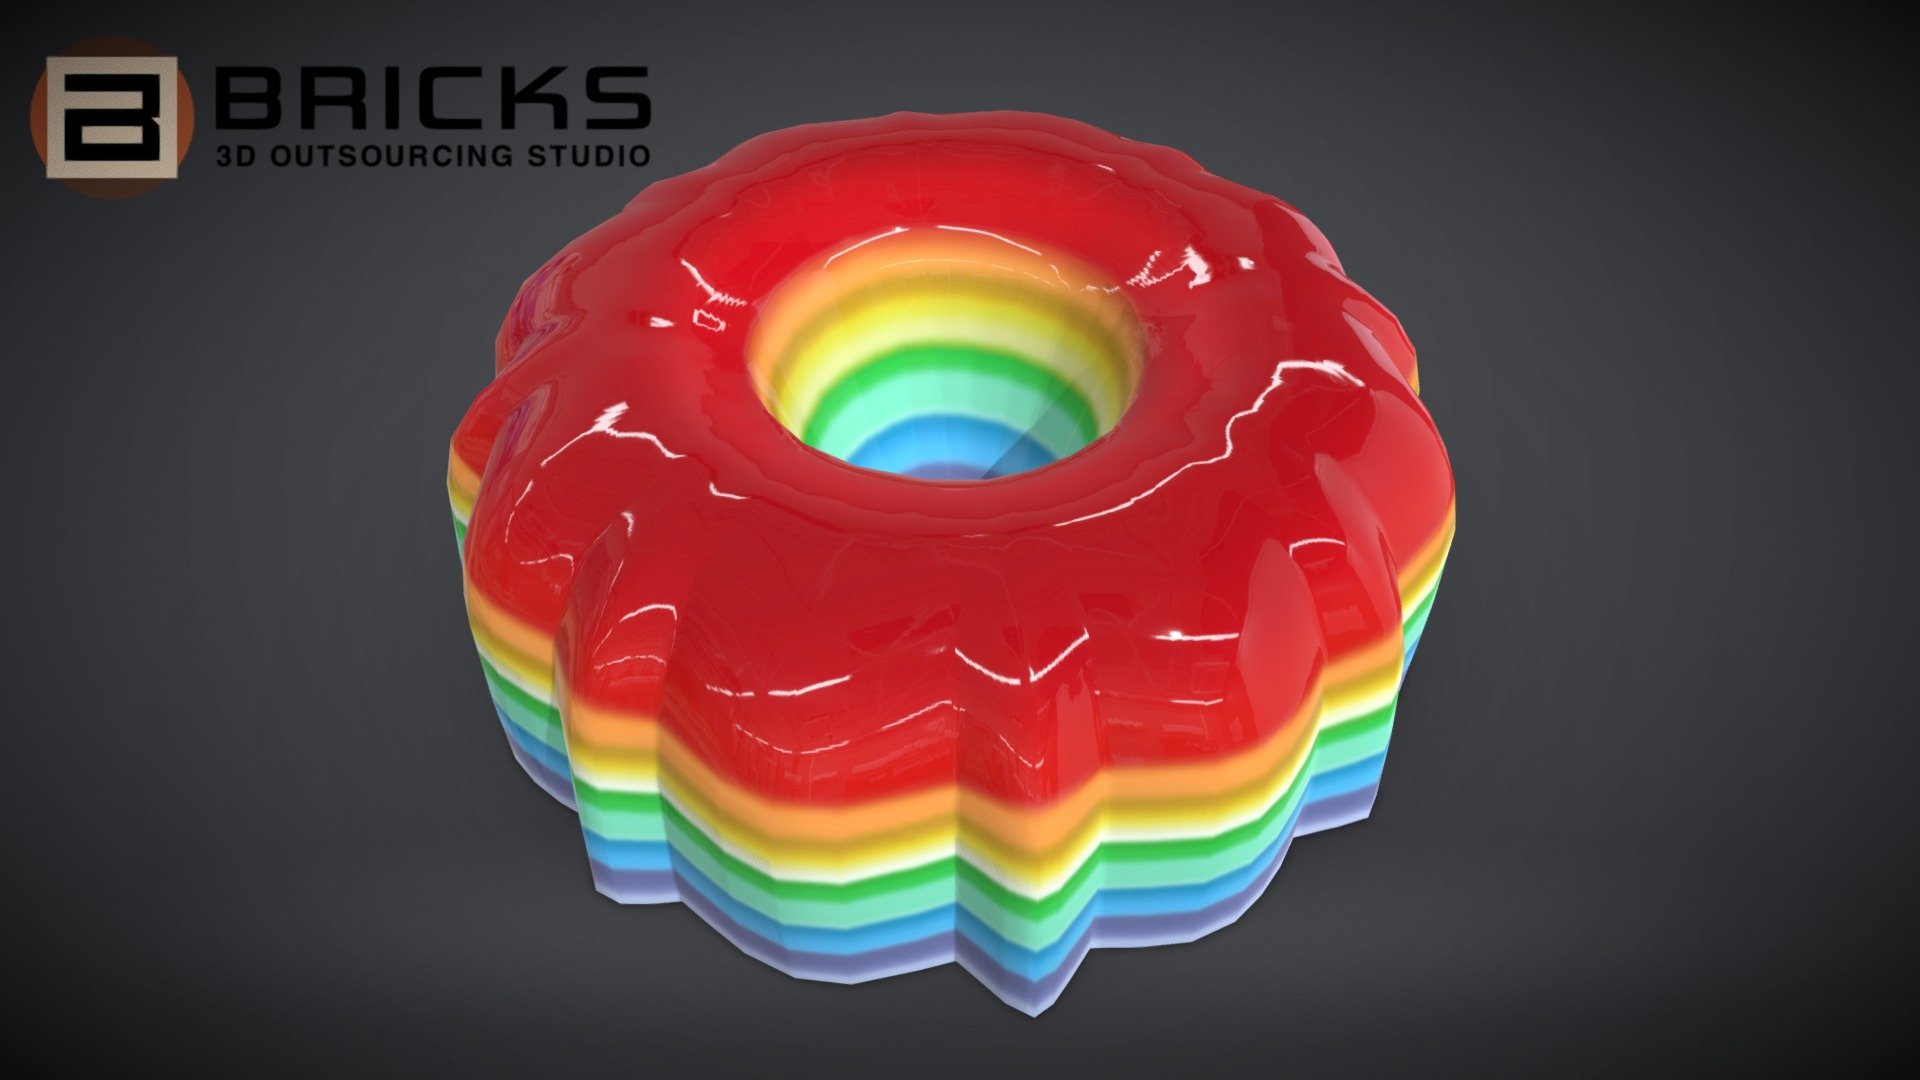 PBR Food Asset:
RainbowJelly
Polycount: 1702
Vertex count: 851
Texture Size: 2048px x 2048px
Normal: OpenGL

If you need any adjust in file please contact us: team@bricks3dstudio.com

Hire us: tringuyen@bricks3dstudio.com
Here is us: https://www.bricks3dstudio.com/
        https://www.artstation.com/bricksstudio
        https://www.facebook.com/Bricks3dstudio/
        https://www.linkedin.com/in/bricks-studio-b10462252/ - RainbowJelly - Buy Royalty Free 3D model by Bricks Studio (@bricks3dstudio) 3d model